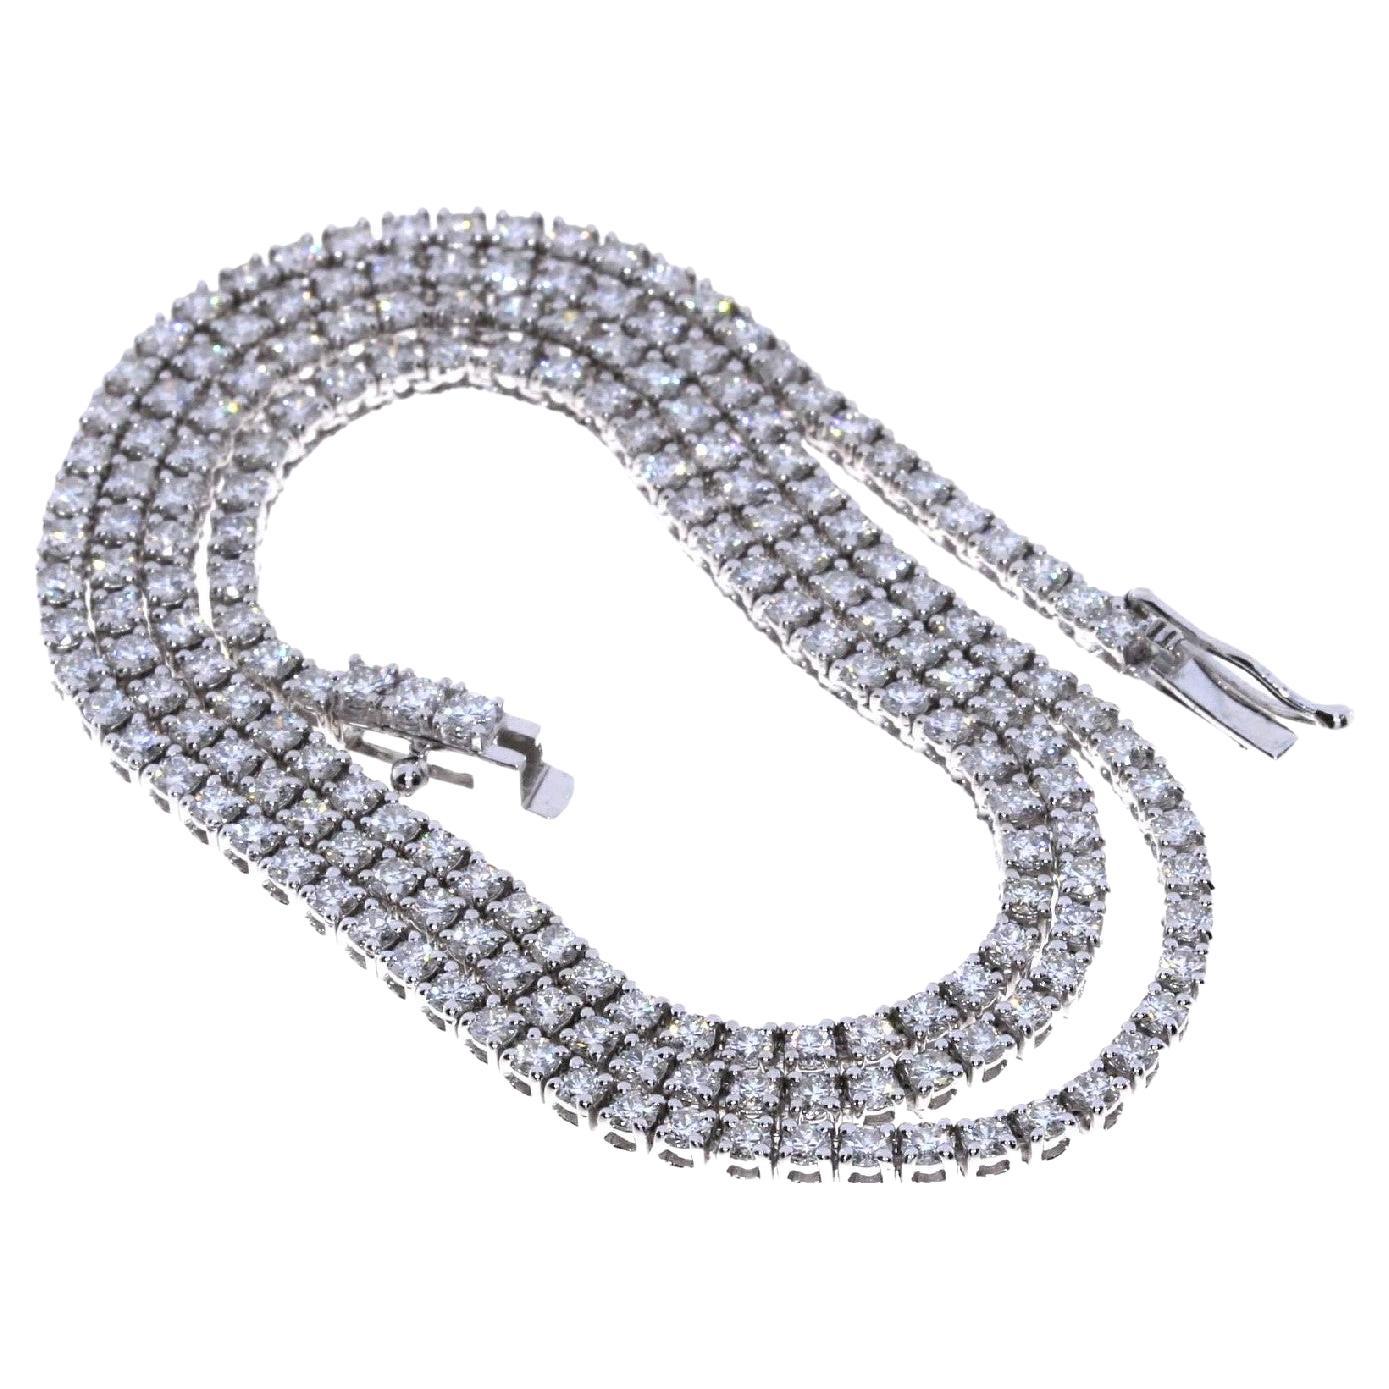 Ounce Collection Jewelry Chain Necklaces